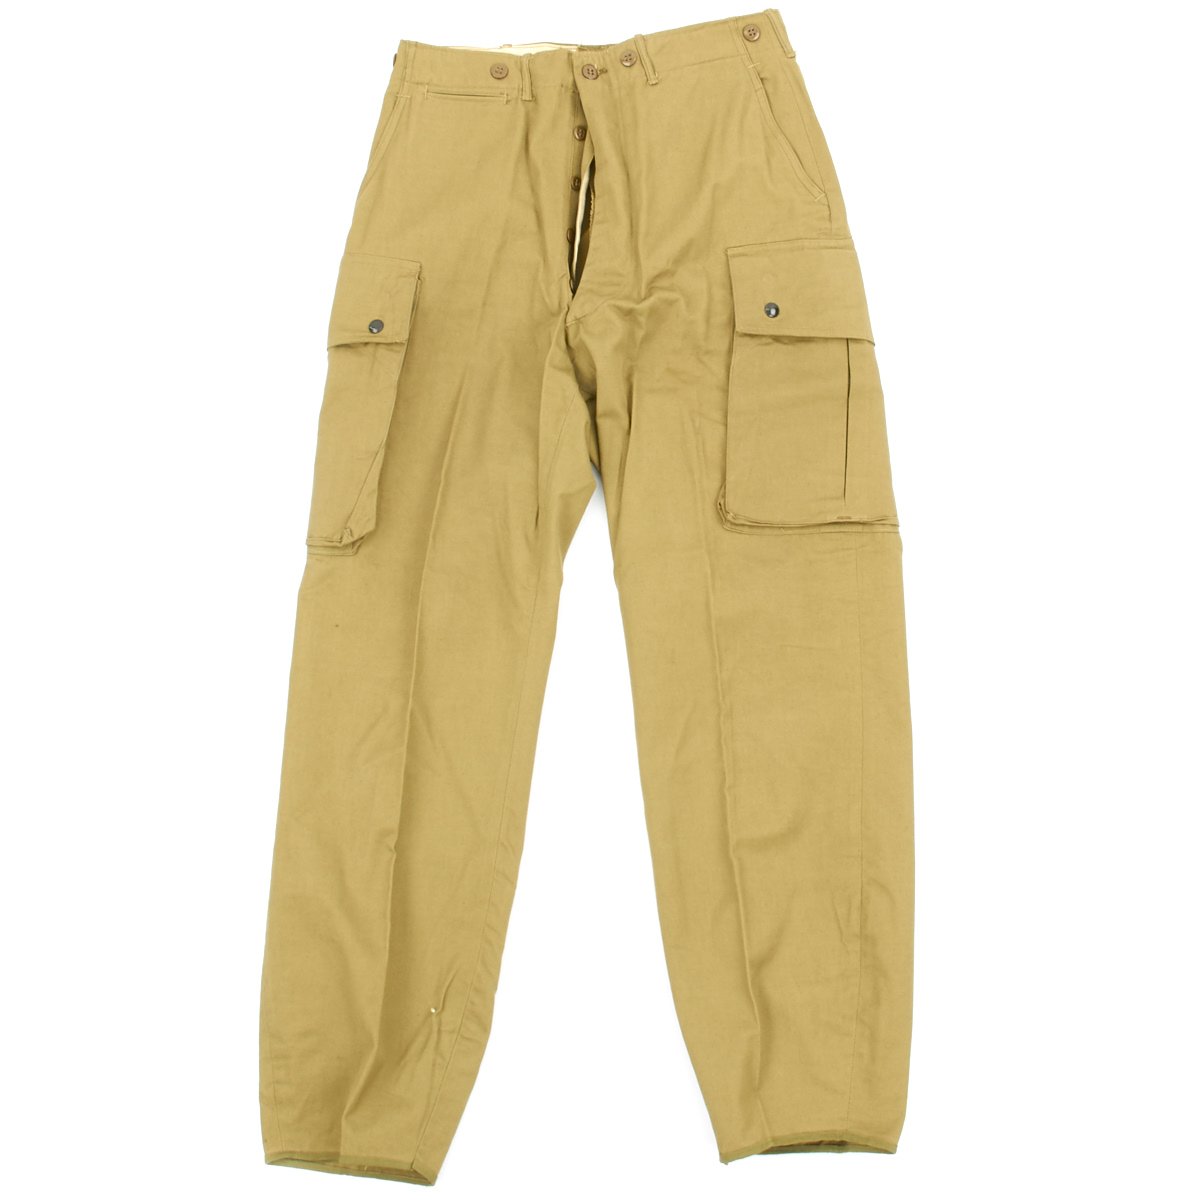 M1942 REINFORCED PARATROOPER JUMP TROUSERS